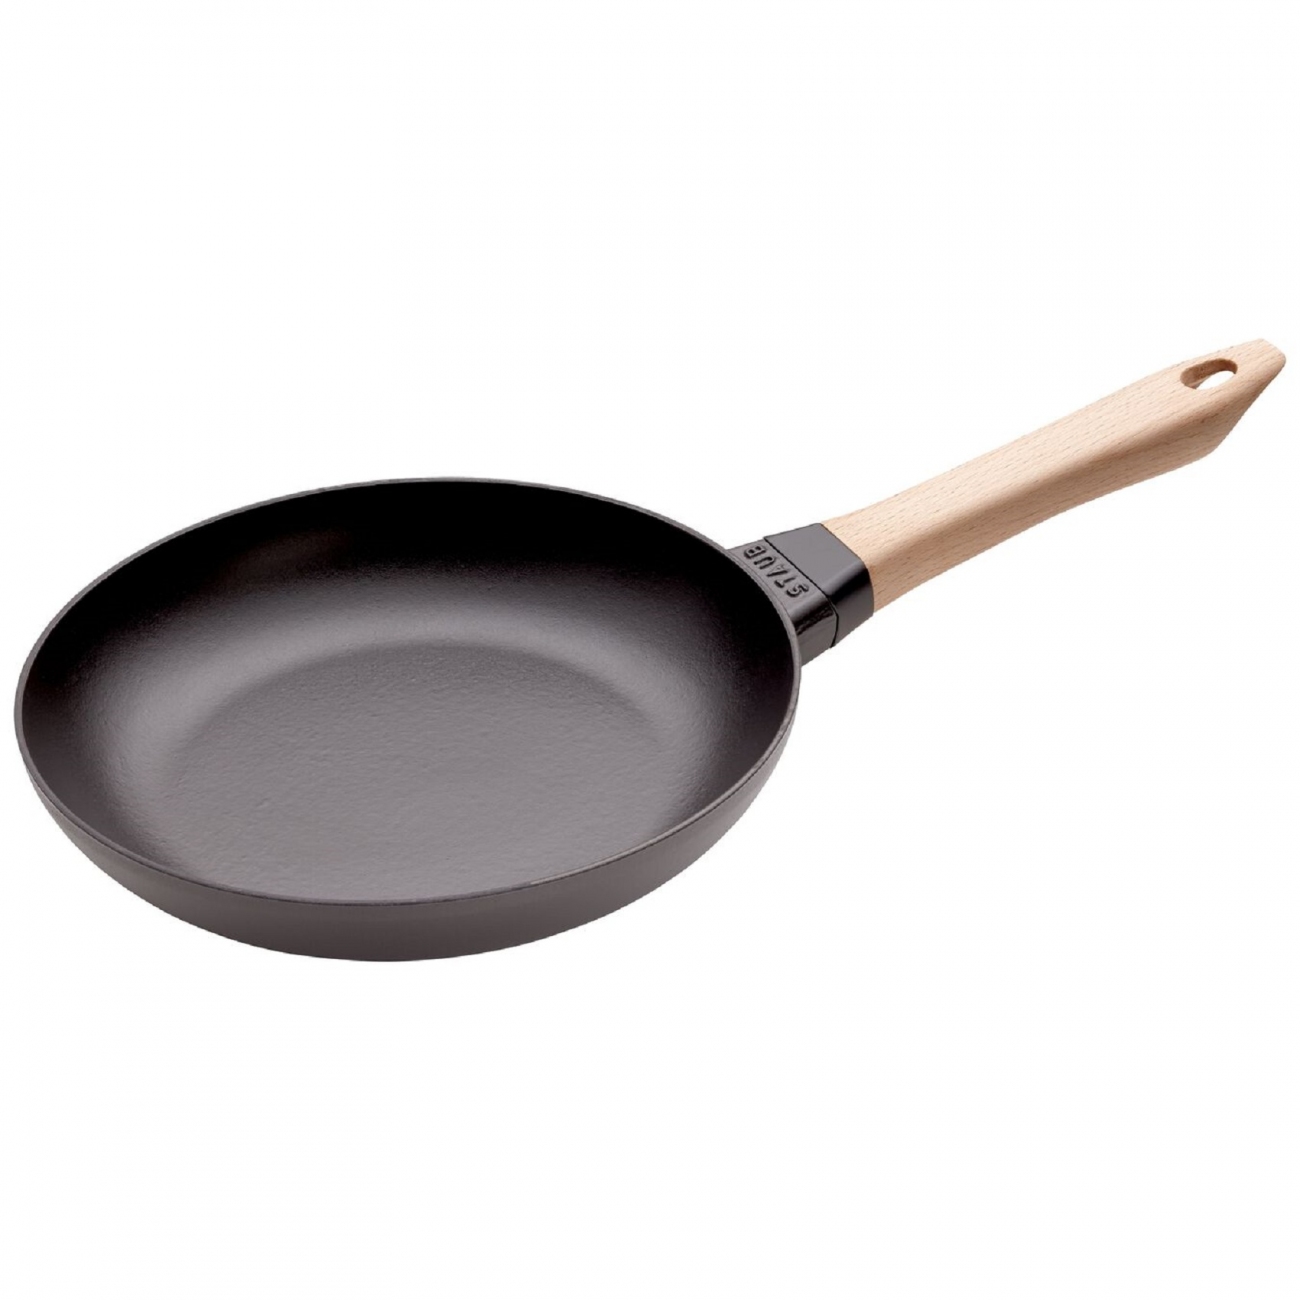 Staub Frying Pan With Wooden Handle 24 Black